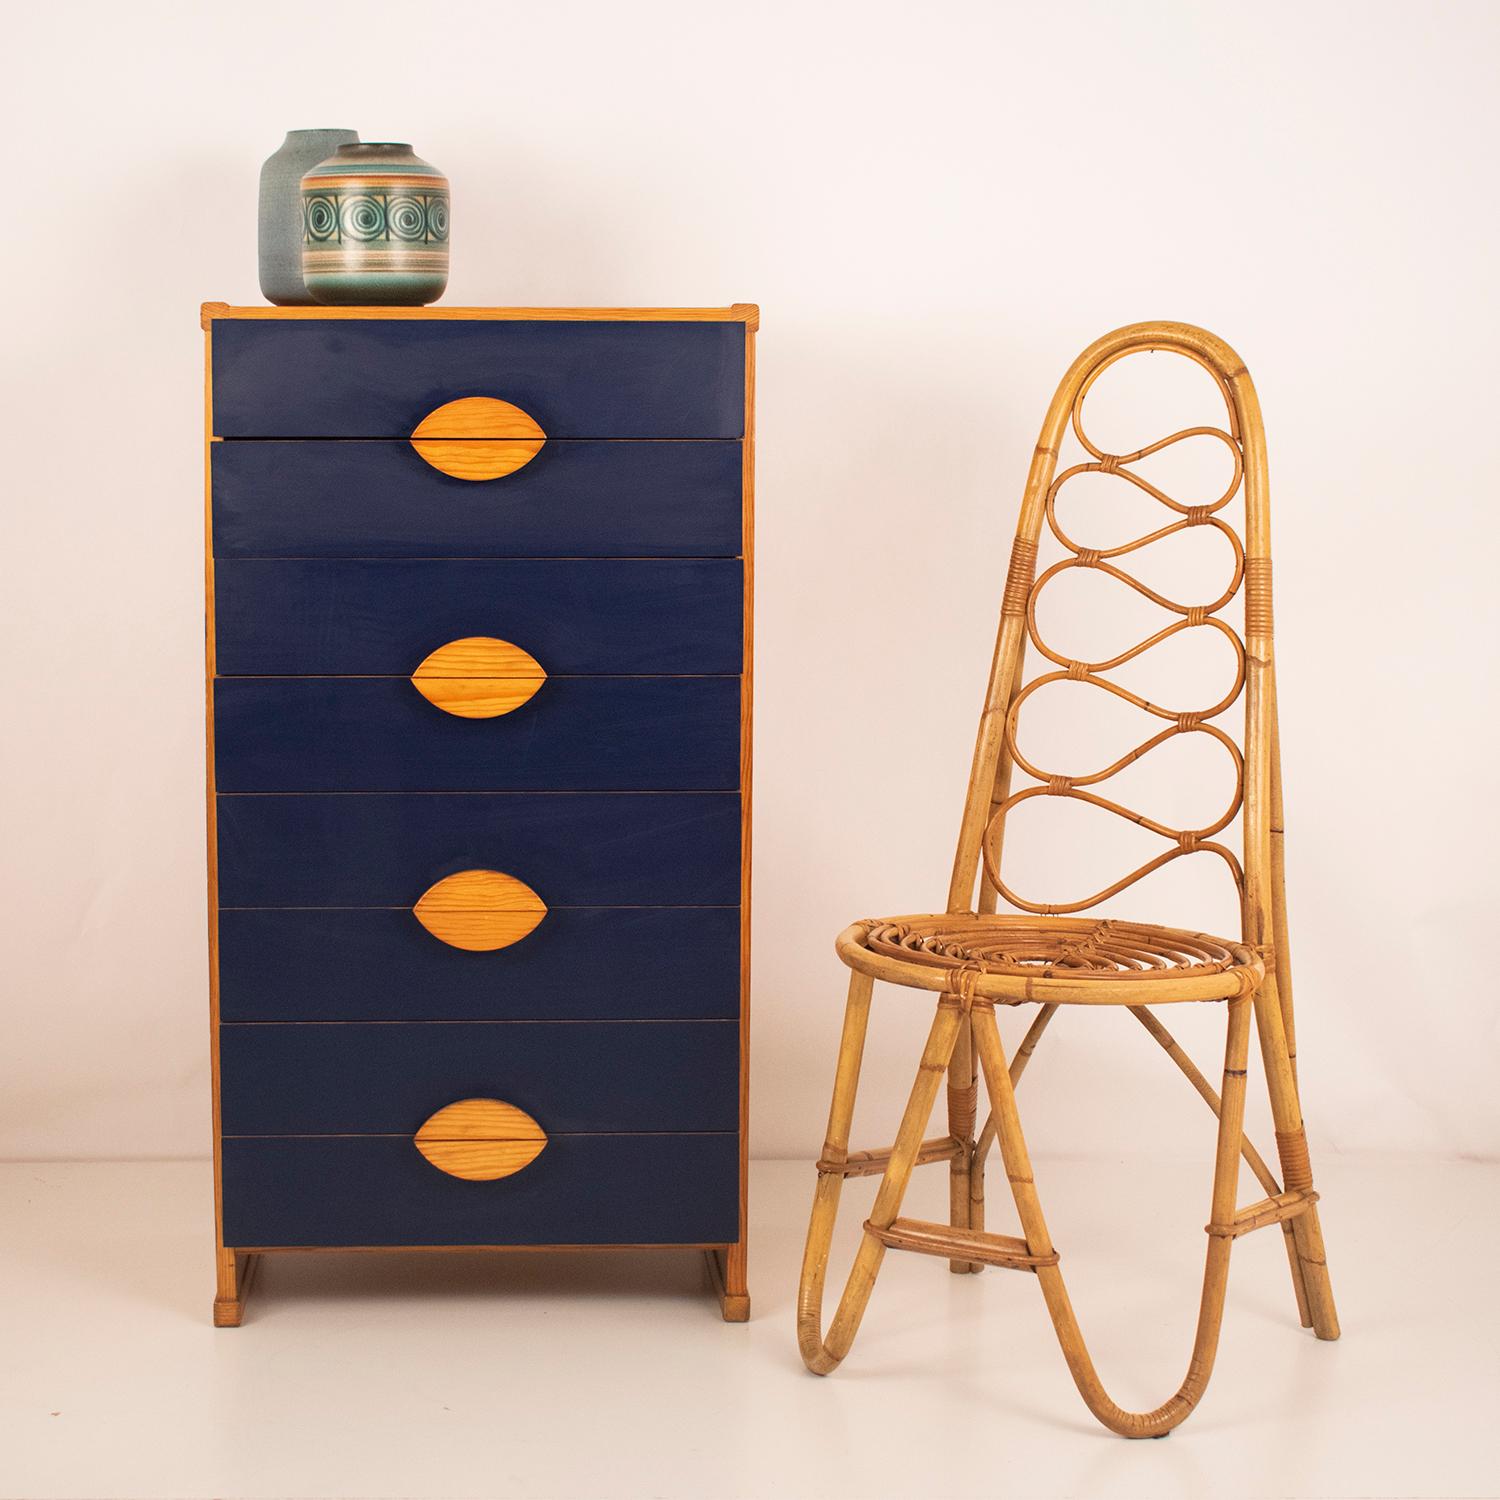 Pine and dark blue formica chest of drawers dresser chiffonier, Spain, 1970's.
In pine, 8 drawers with a dark blue Formica front and pine handle.
 